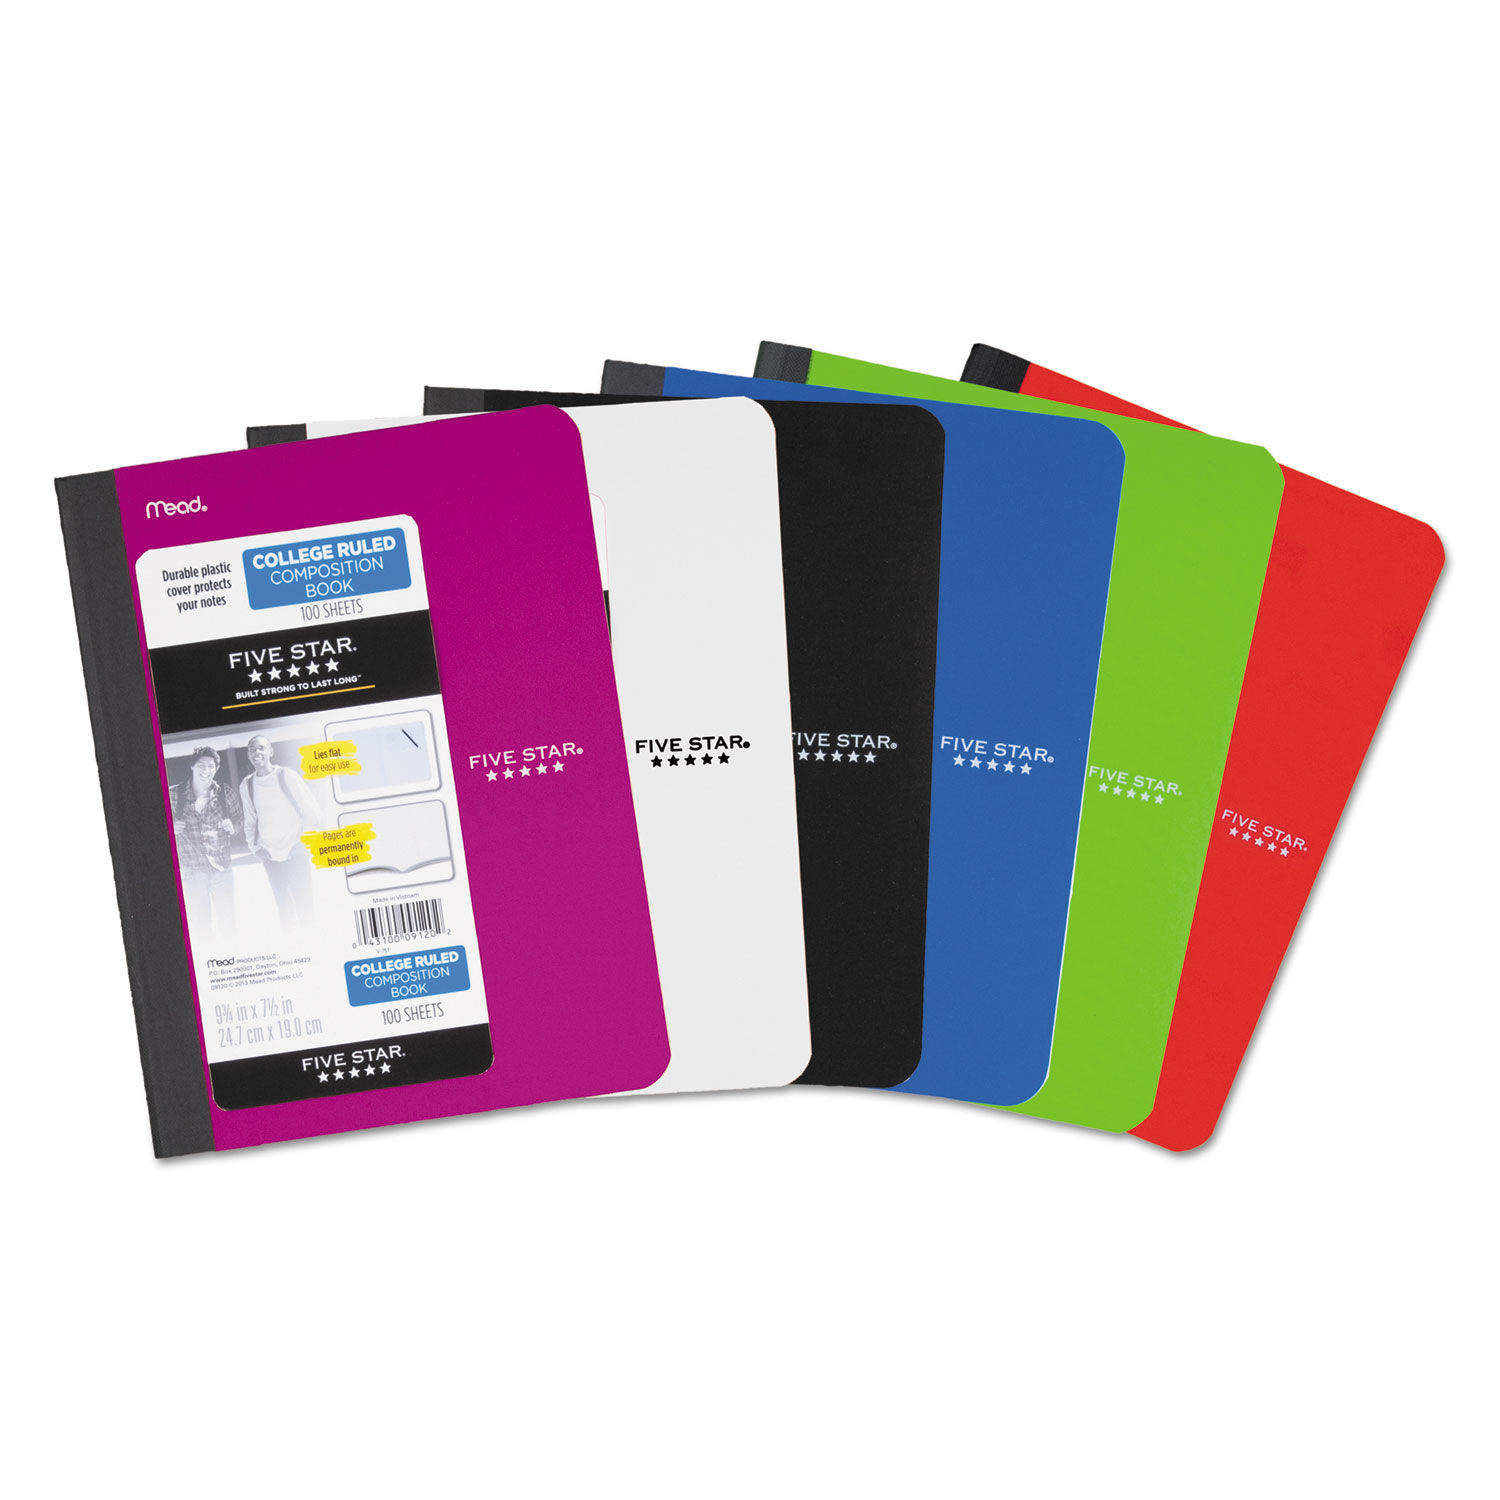 Composition Book Casebound, Medium/College Rule, Randomly Assorted Cover Color, (100) 9.75 x 7.5 Sheets